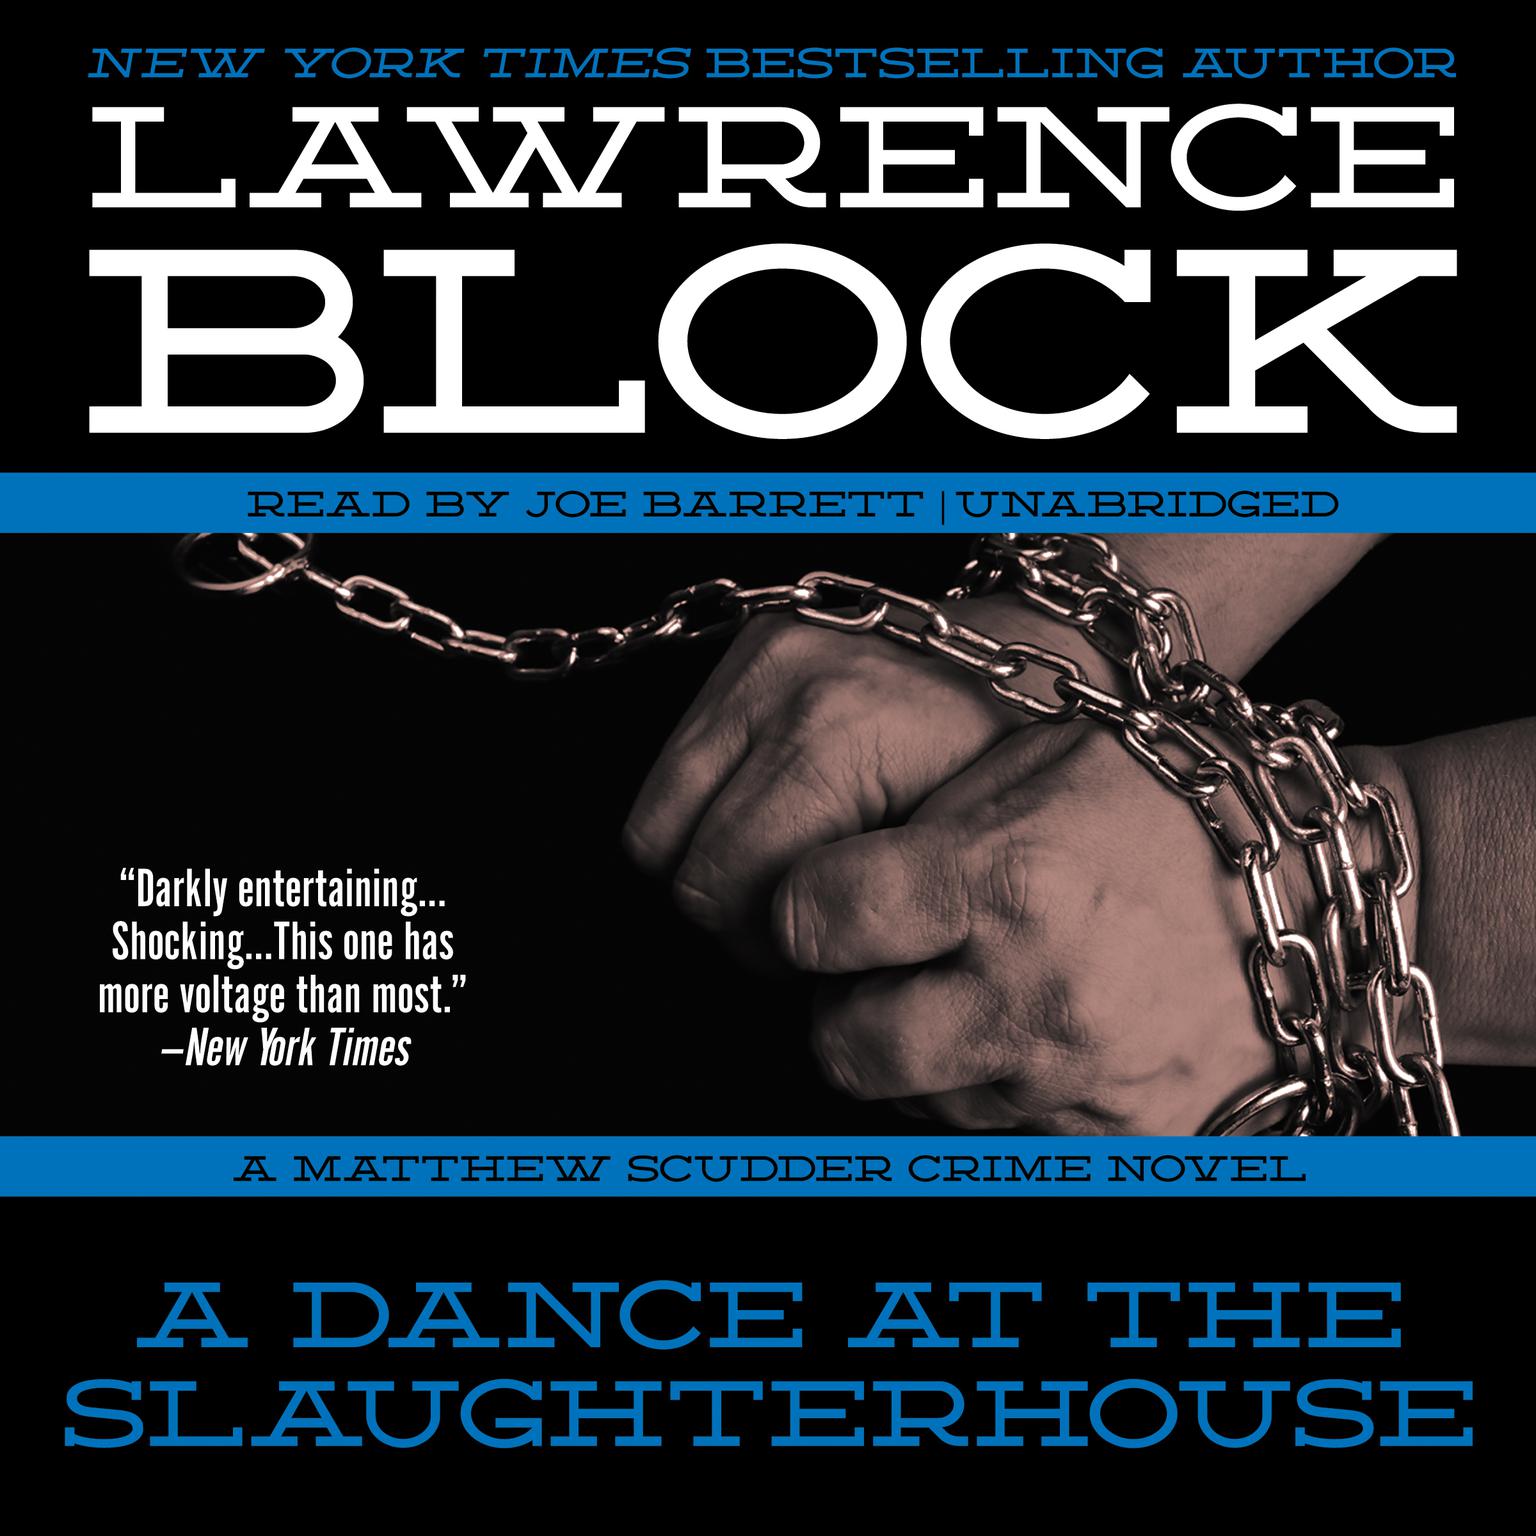 A Dance at the Slaughterhouse: A Matthew Scudder Crime Novel Audiobook, by Lawrence Block